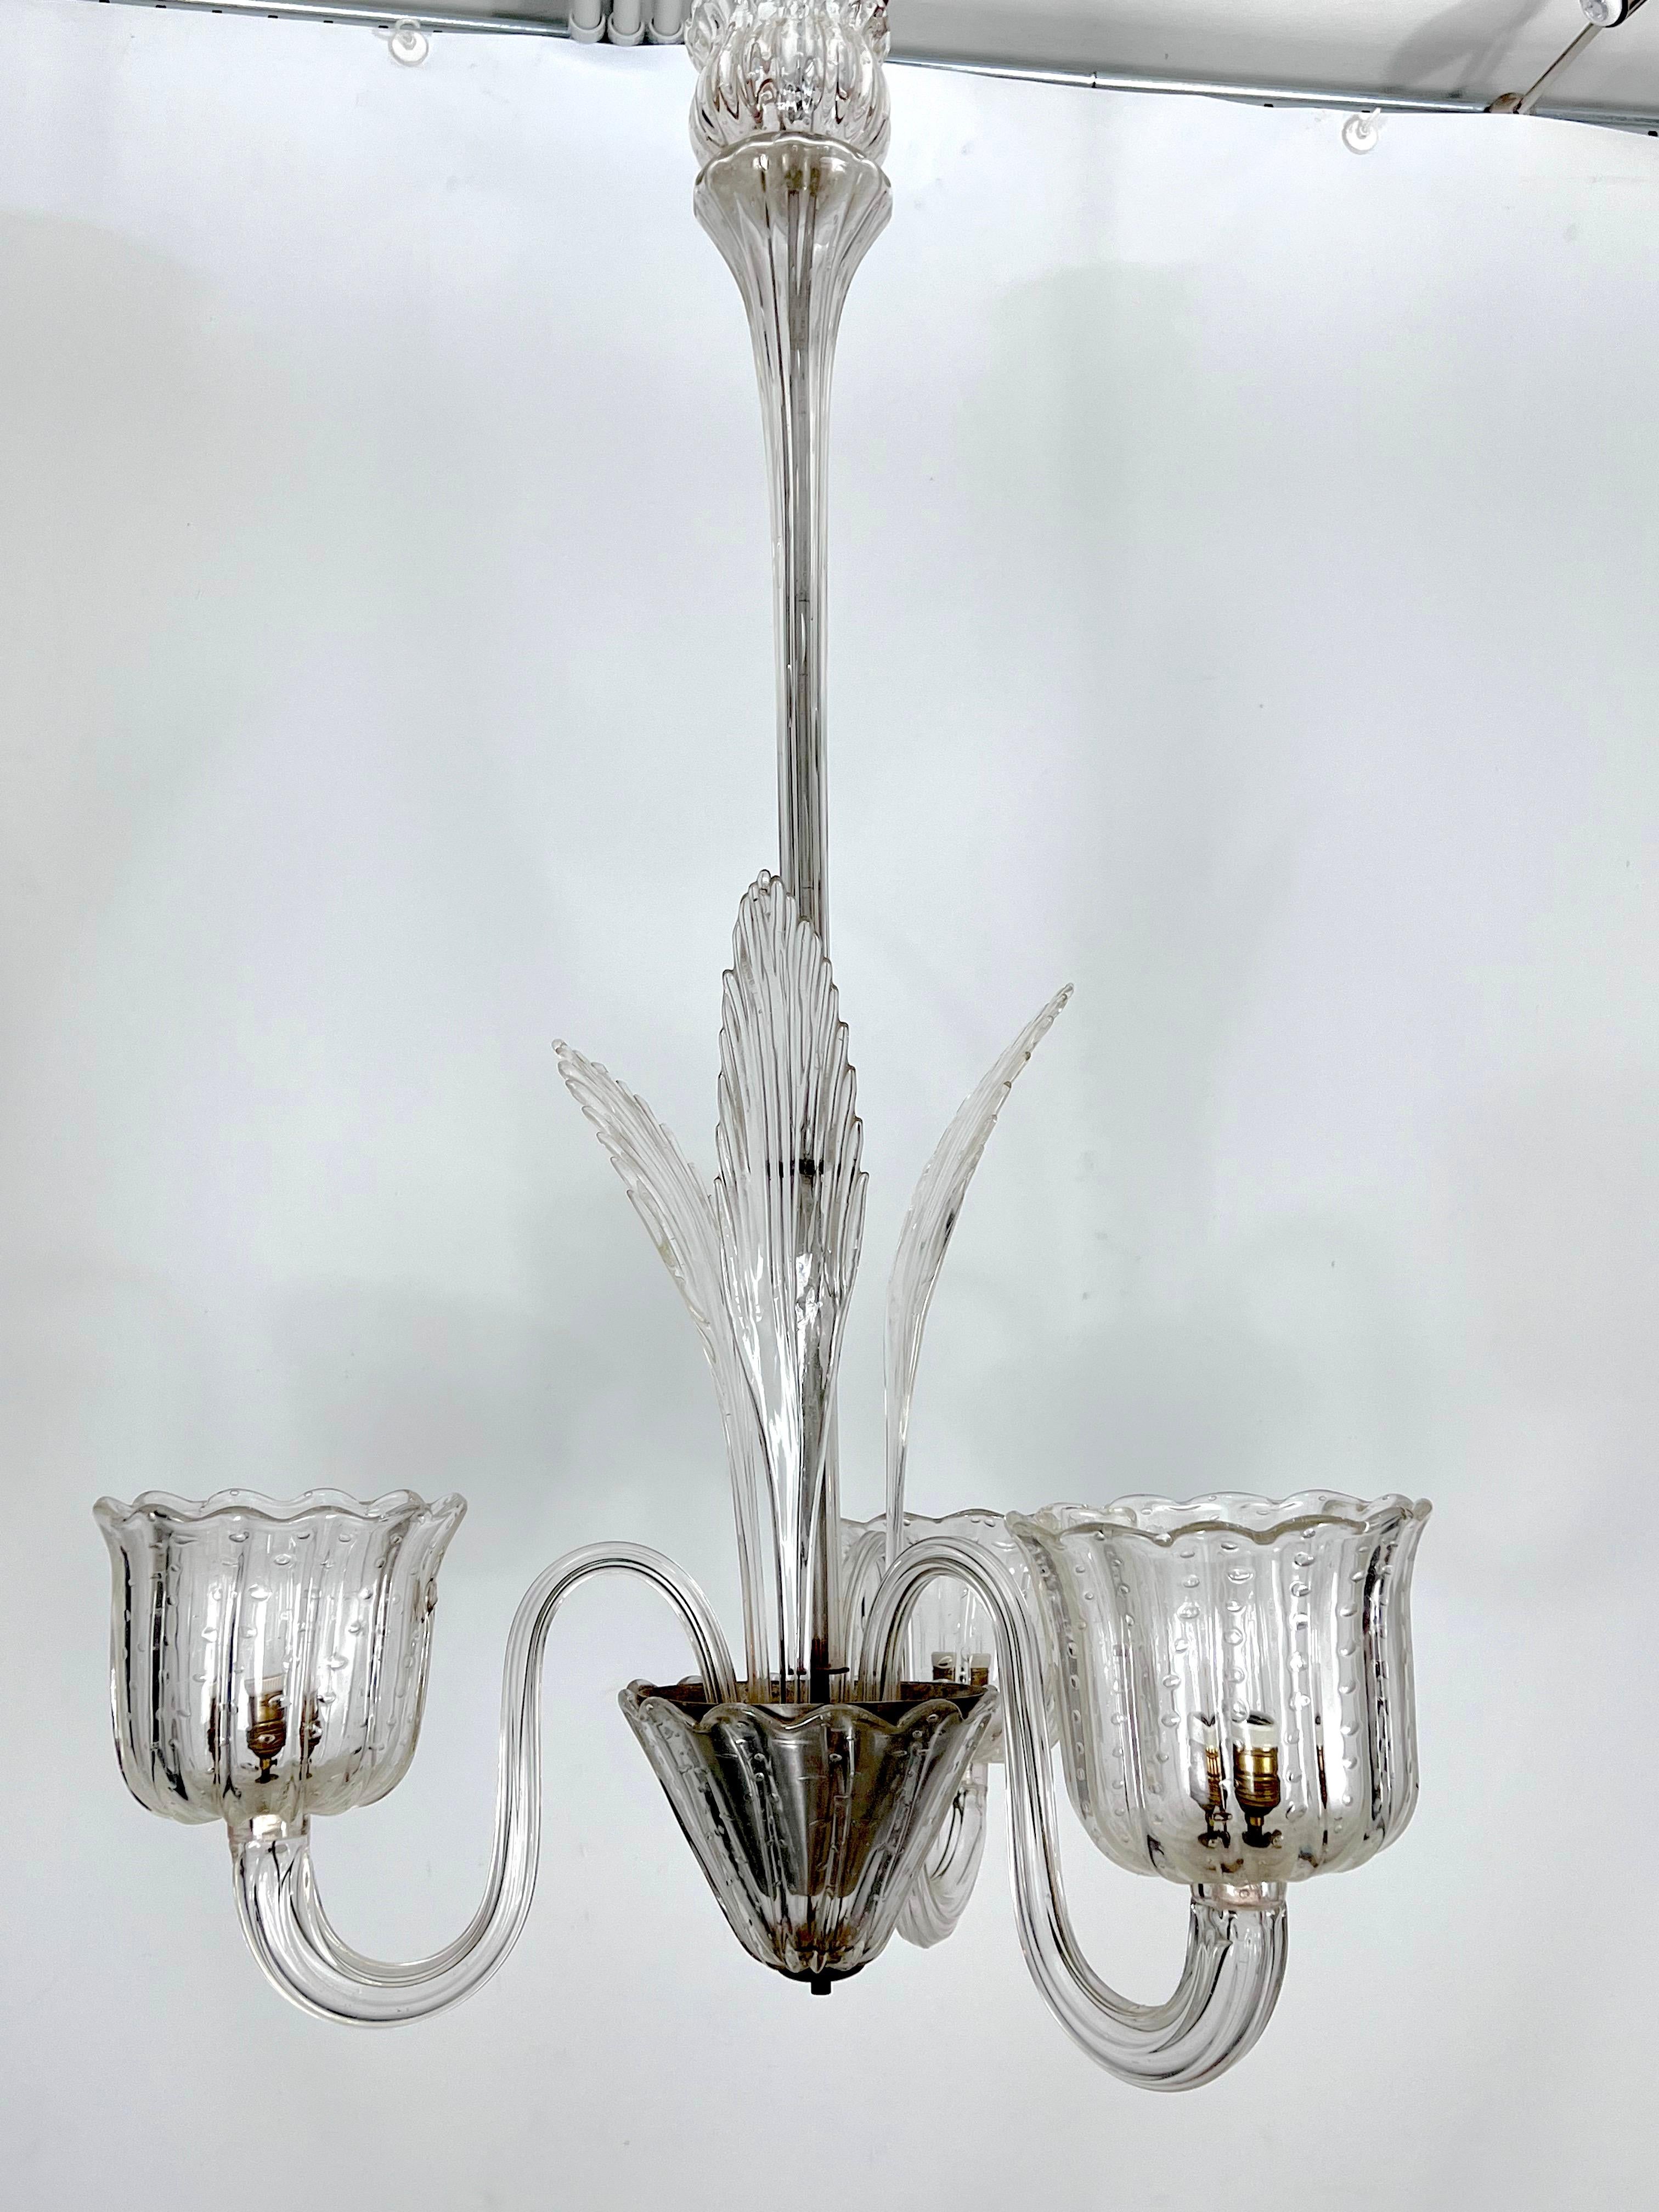 Three arms chandelier in Bullicante glass with large clear light diffusers. Designed by Ercole Barovier and produced in Murano during the 40s. Great original vintage condition with normal trace of age and use.Full working with EU standard, adaptable